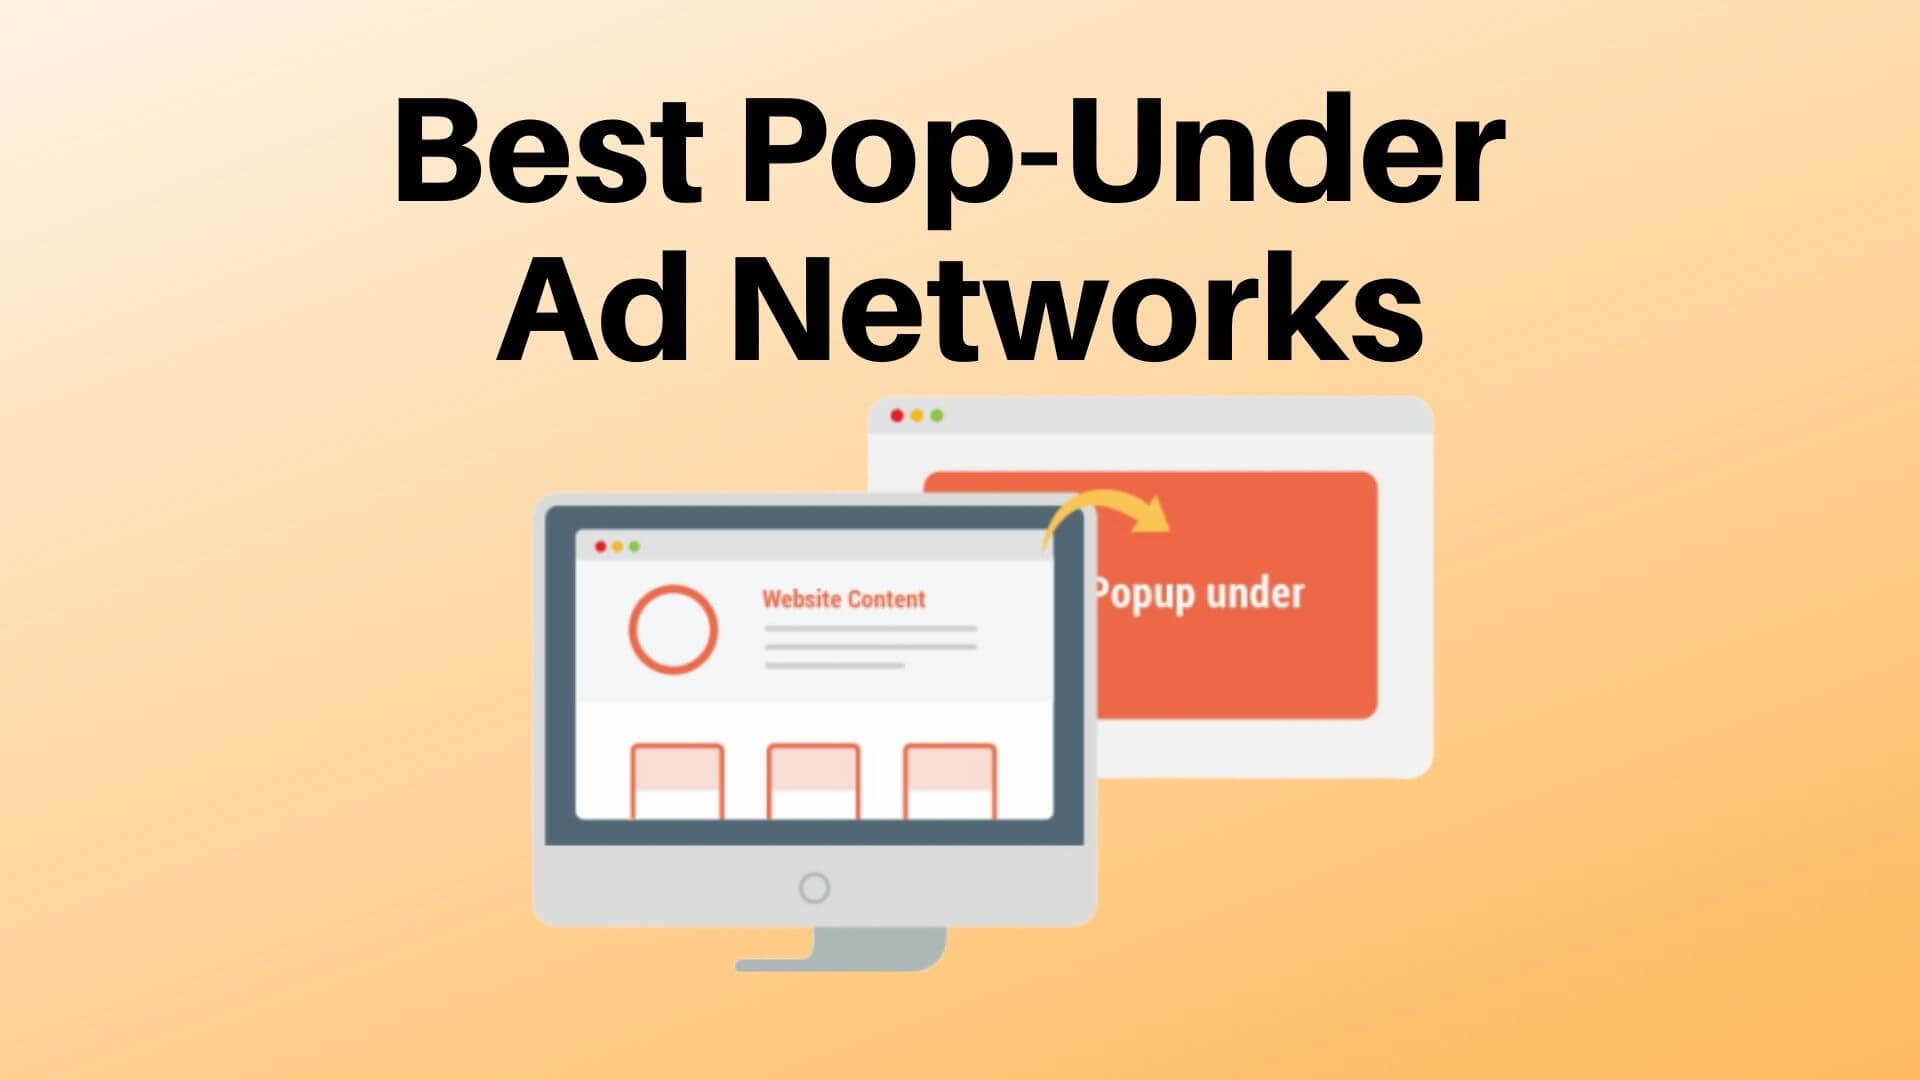 Earn money online by using Popups and Popunders